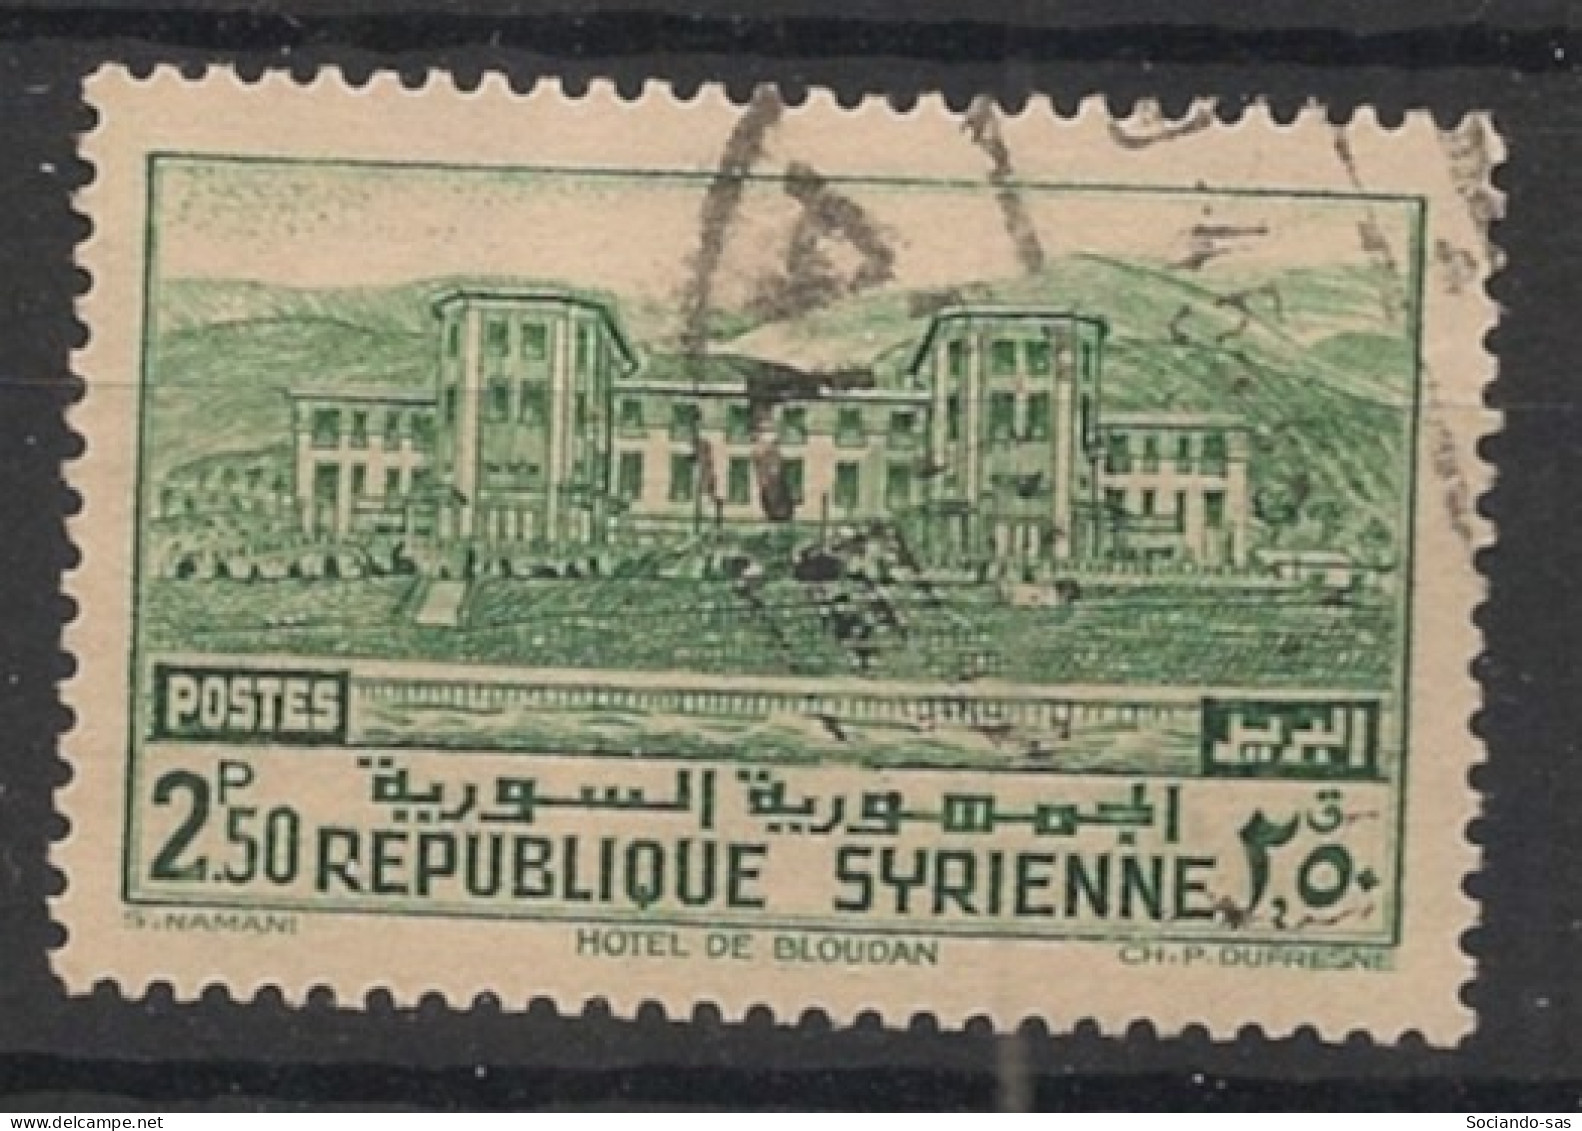 SYRIE - 1940 - N°YT. 256 - Bloudan 2pi50 - Oblitéré / Used - Used Stamps